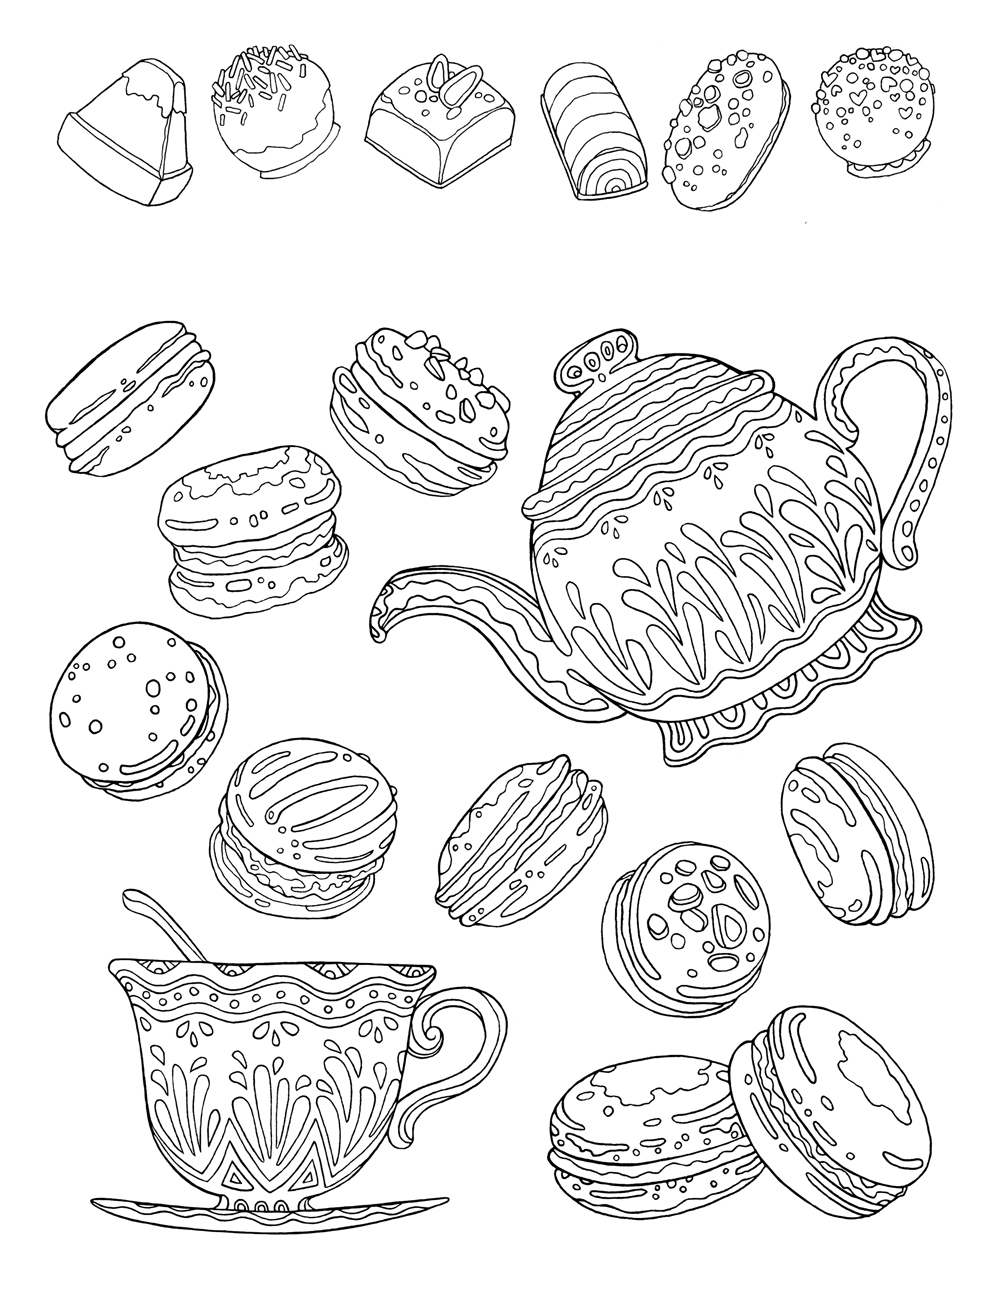 Stickers - Free Colouring Pages & Printables